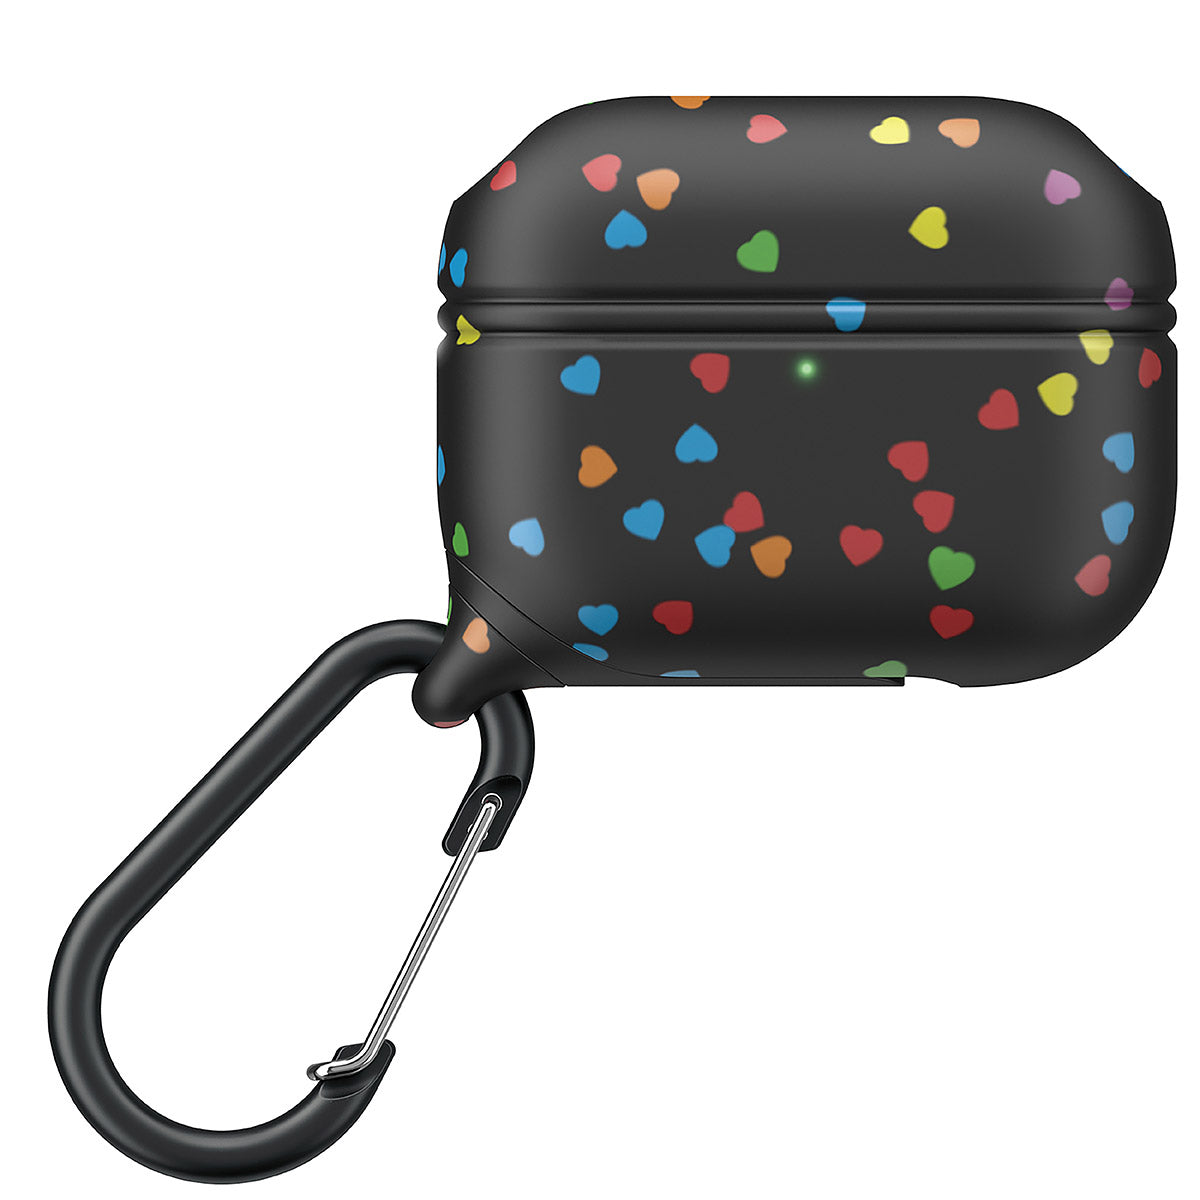 catalyst airpods pro gen 2 1 waterproof case carabiner special edition black with hearts front view